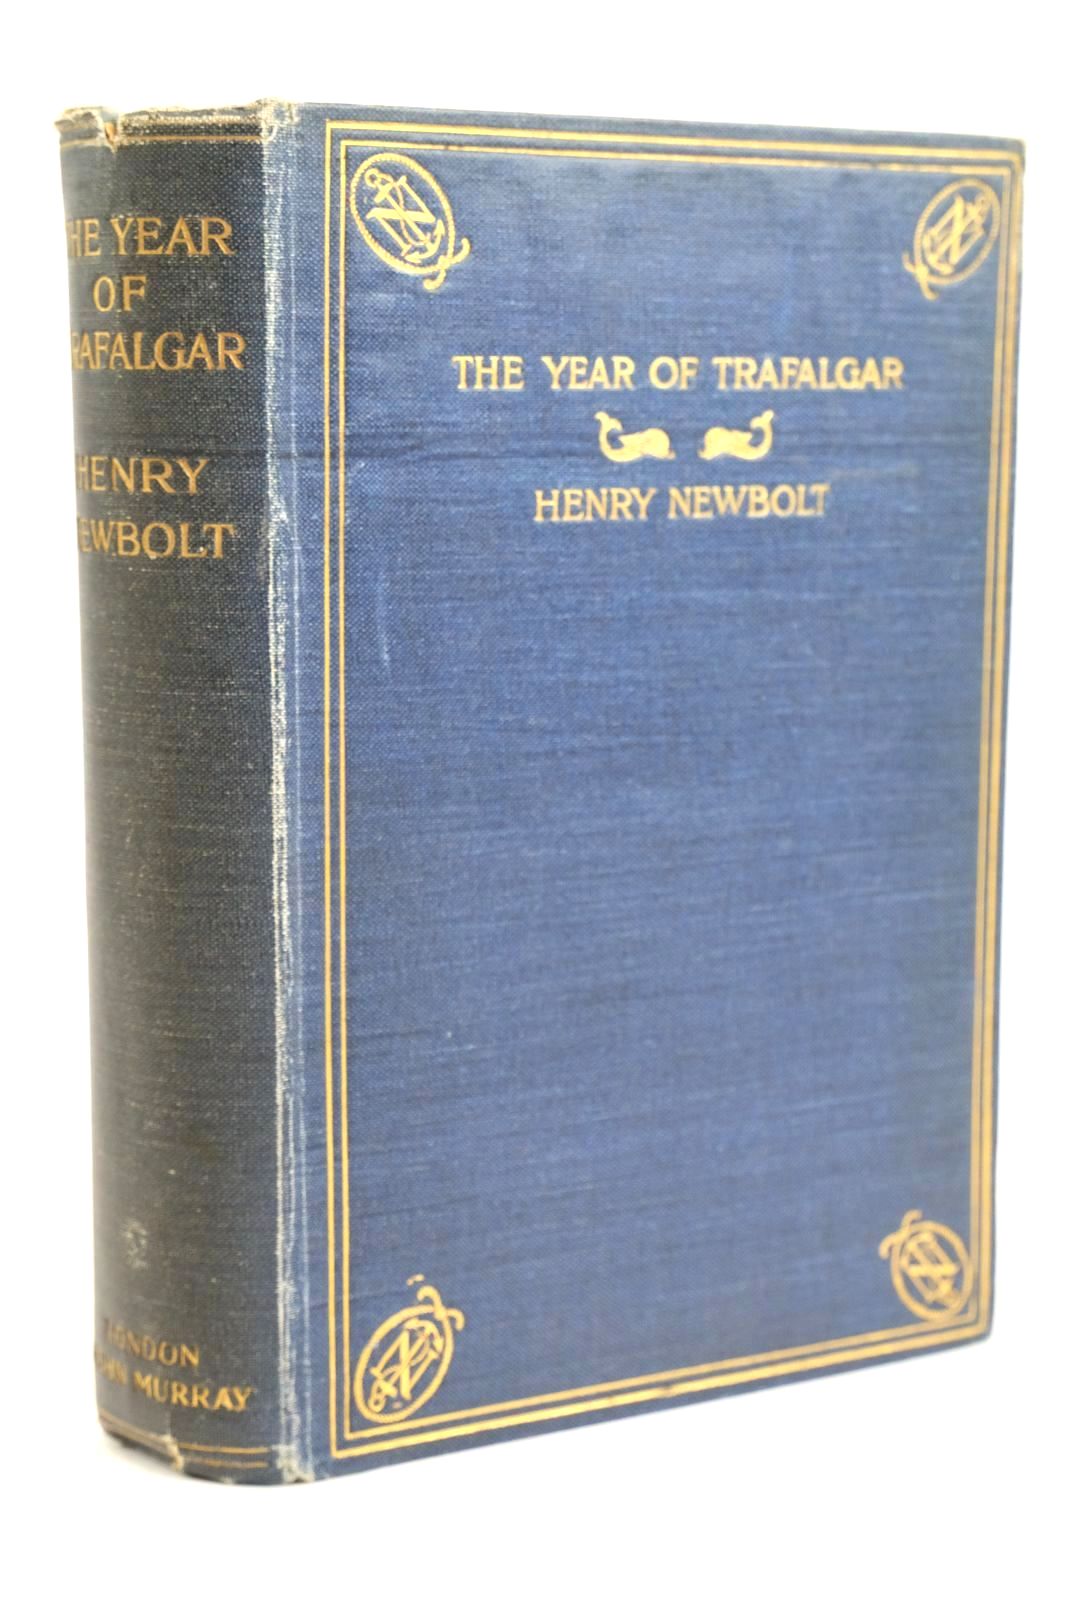 Photo of THE YEAR OF TRAFALGAR written by Newbolt, Henry published by John Murray (STOCK CODE: 1320174)  for sale by Stella & Rose's Books